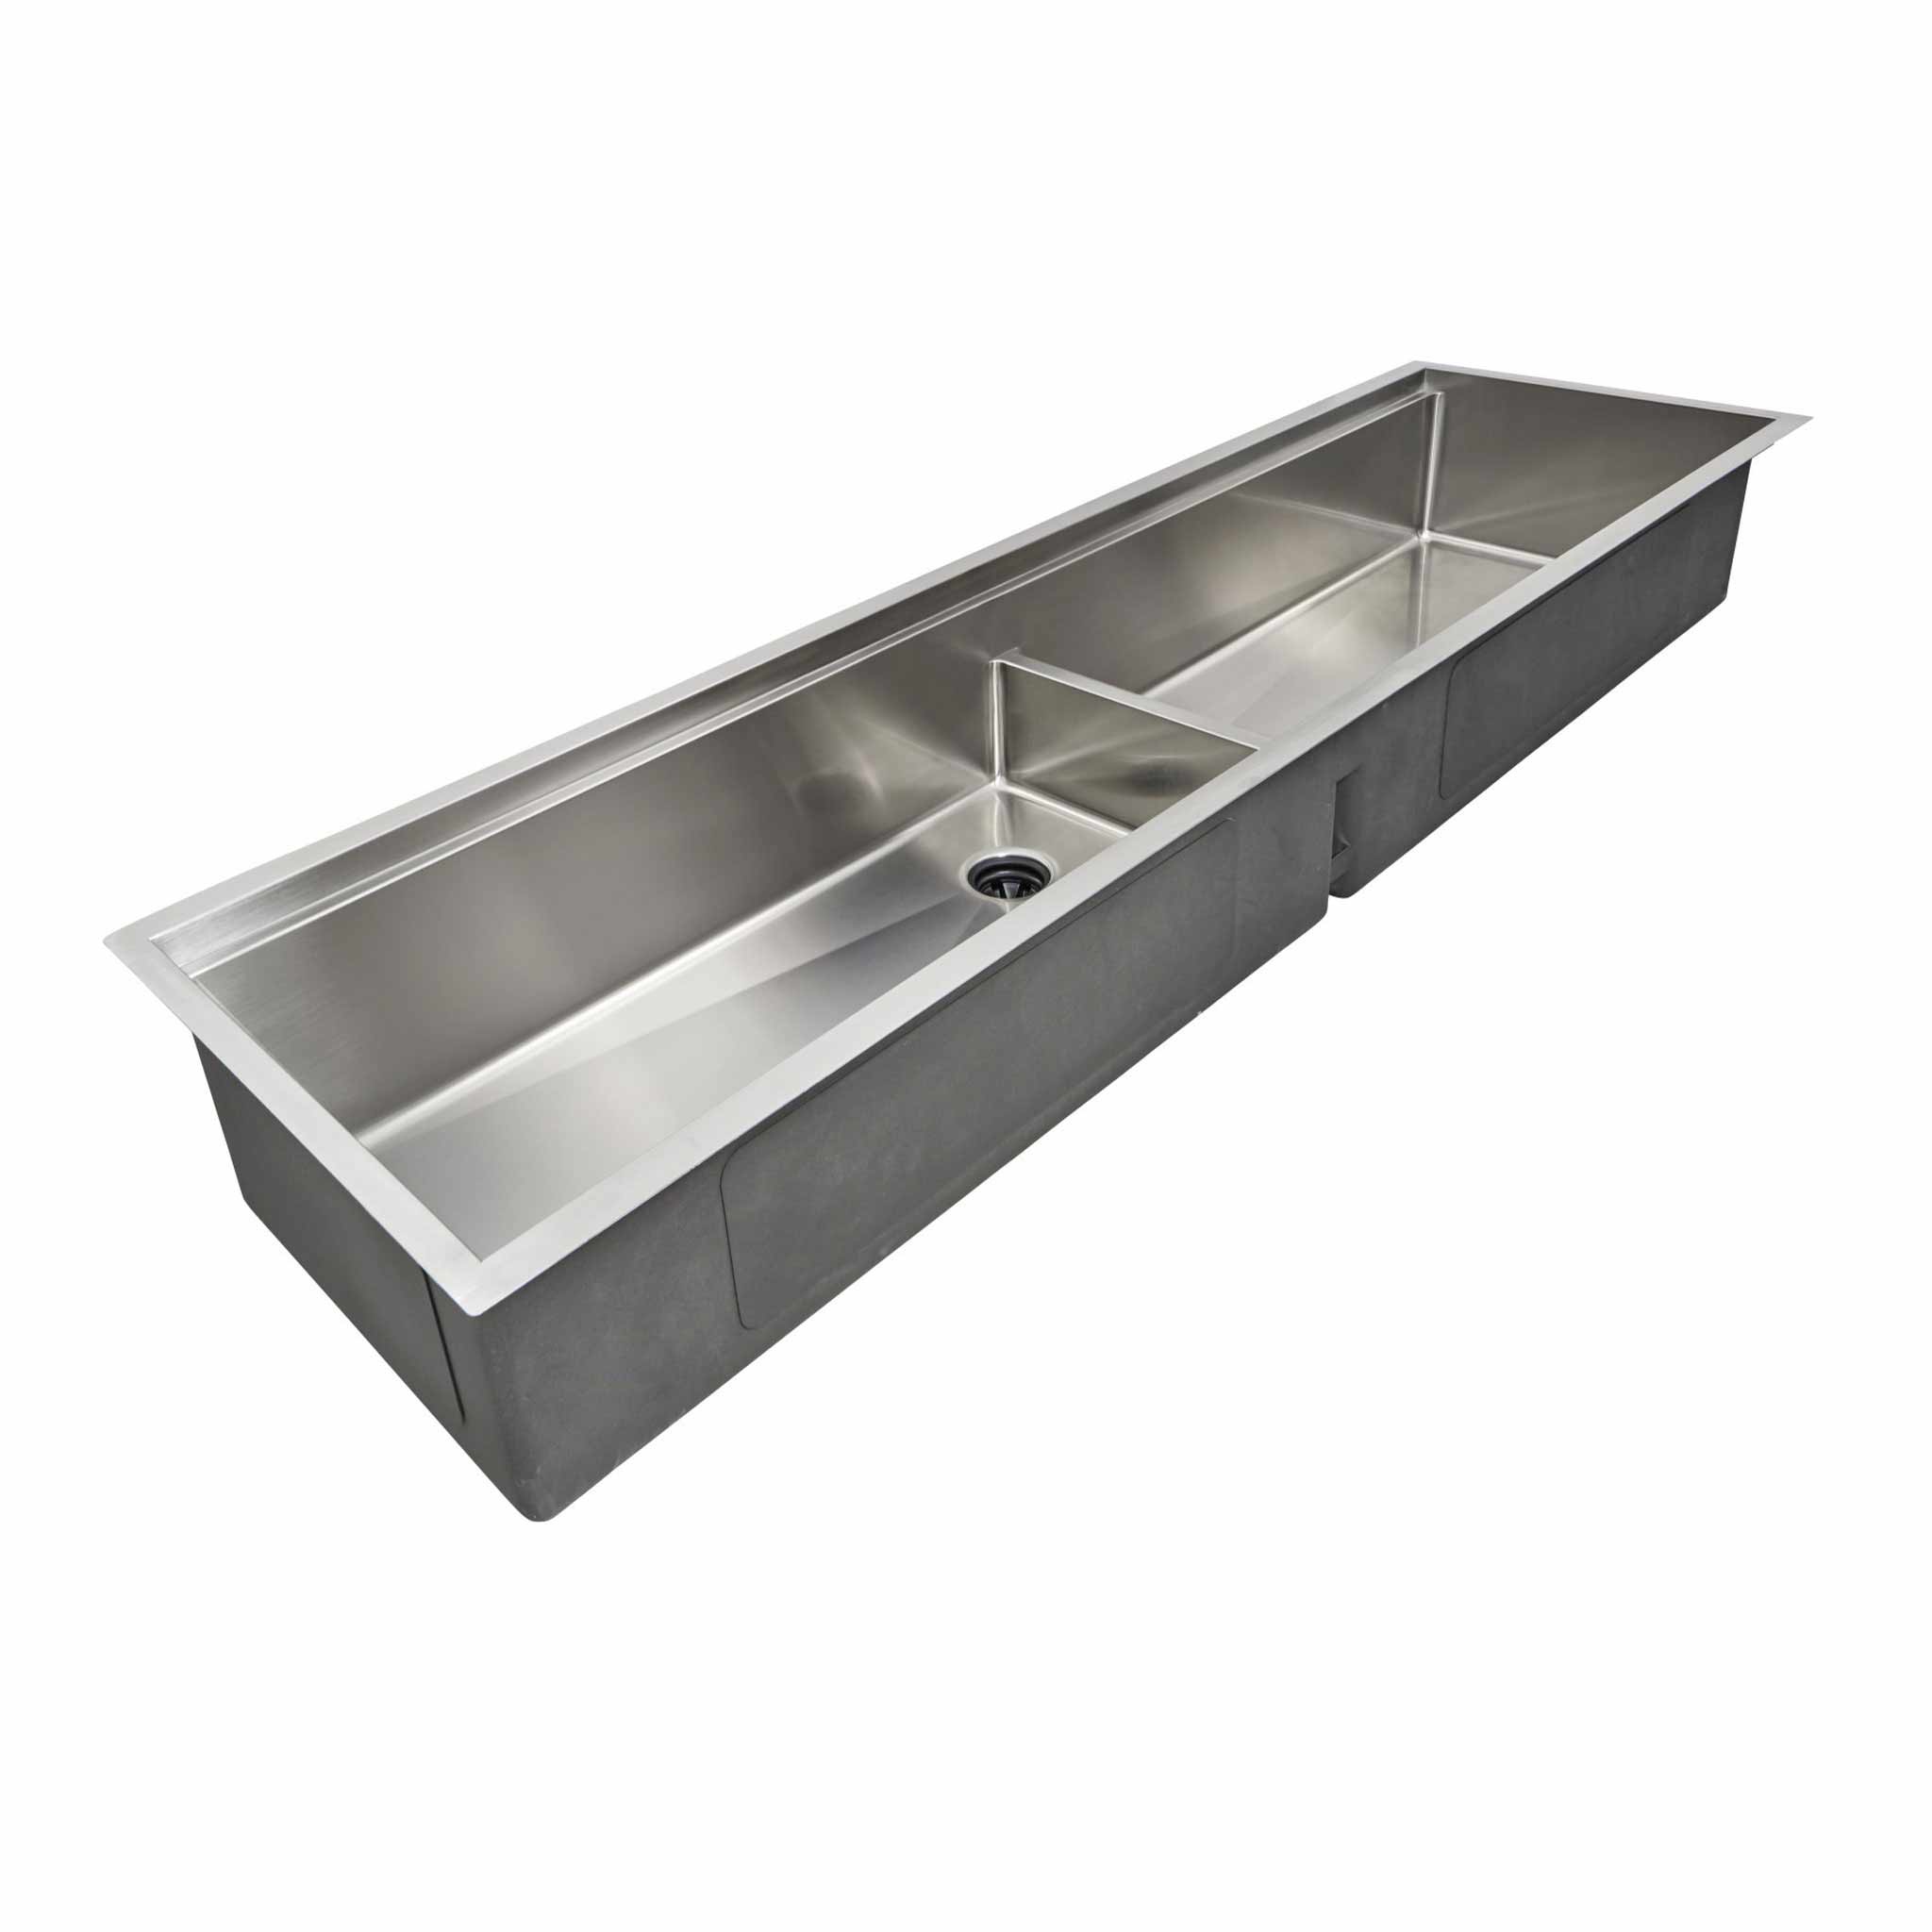 74" Six foot double bowl workstation sink